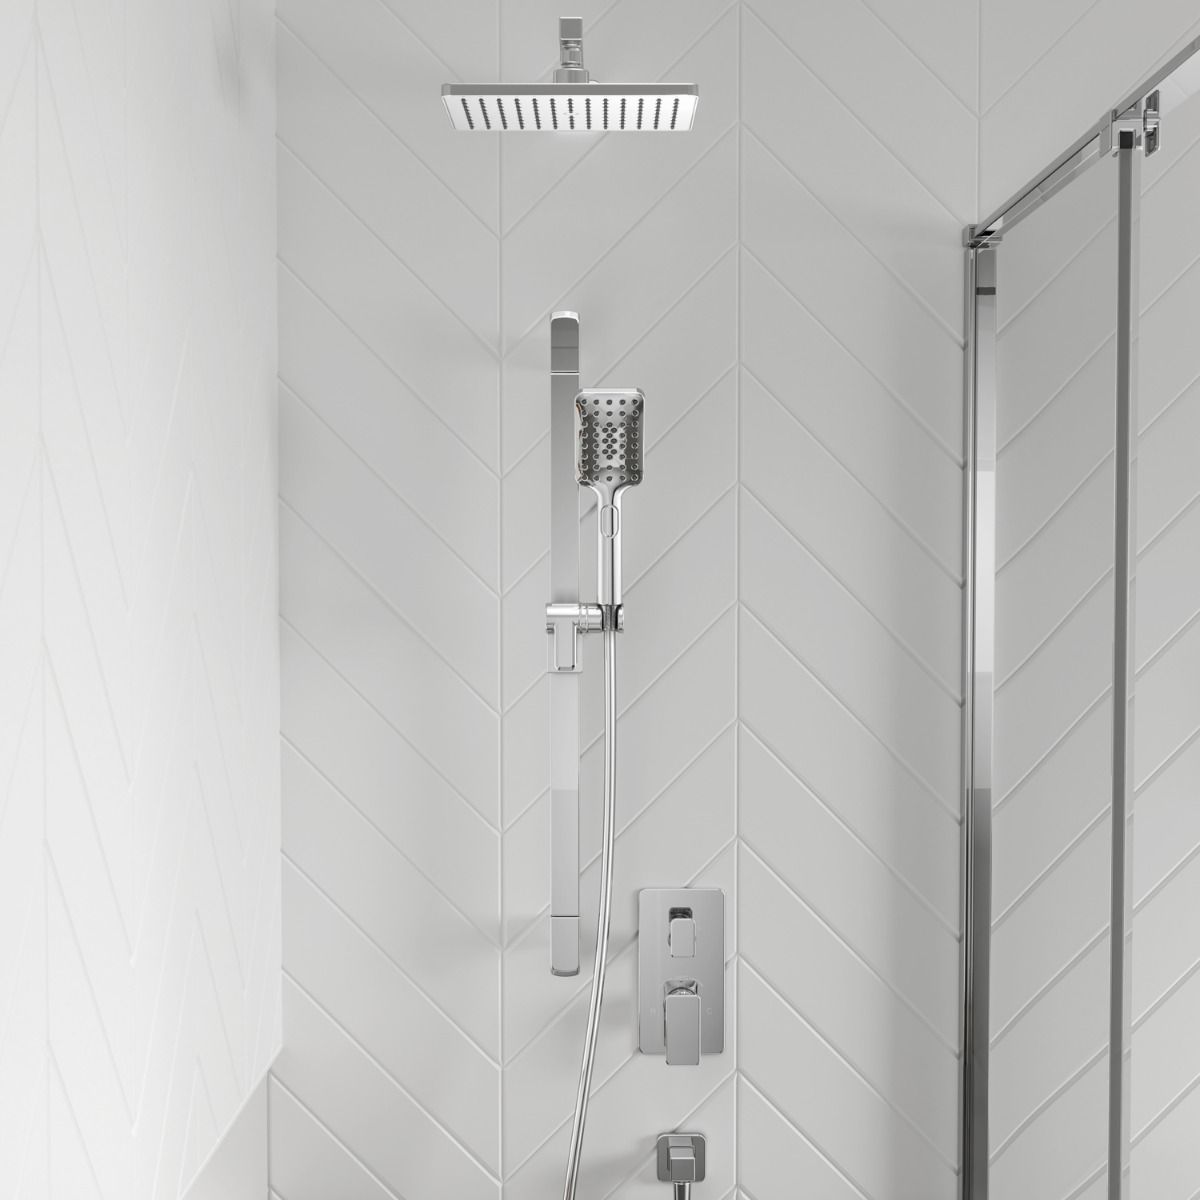 Kalia - Kareo TD2 (Valve Not Included) : Aquatonik T/P With Diverter Shower System With Vertical Ceiling Arm - Chrome